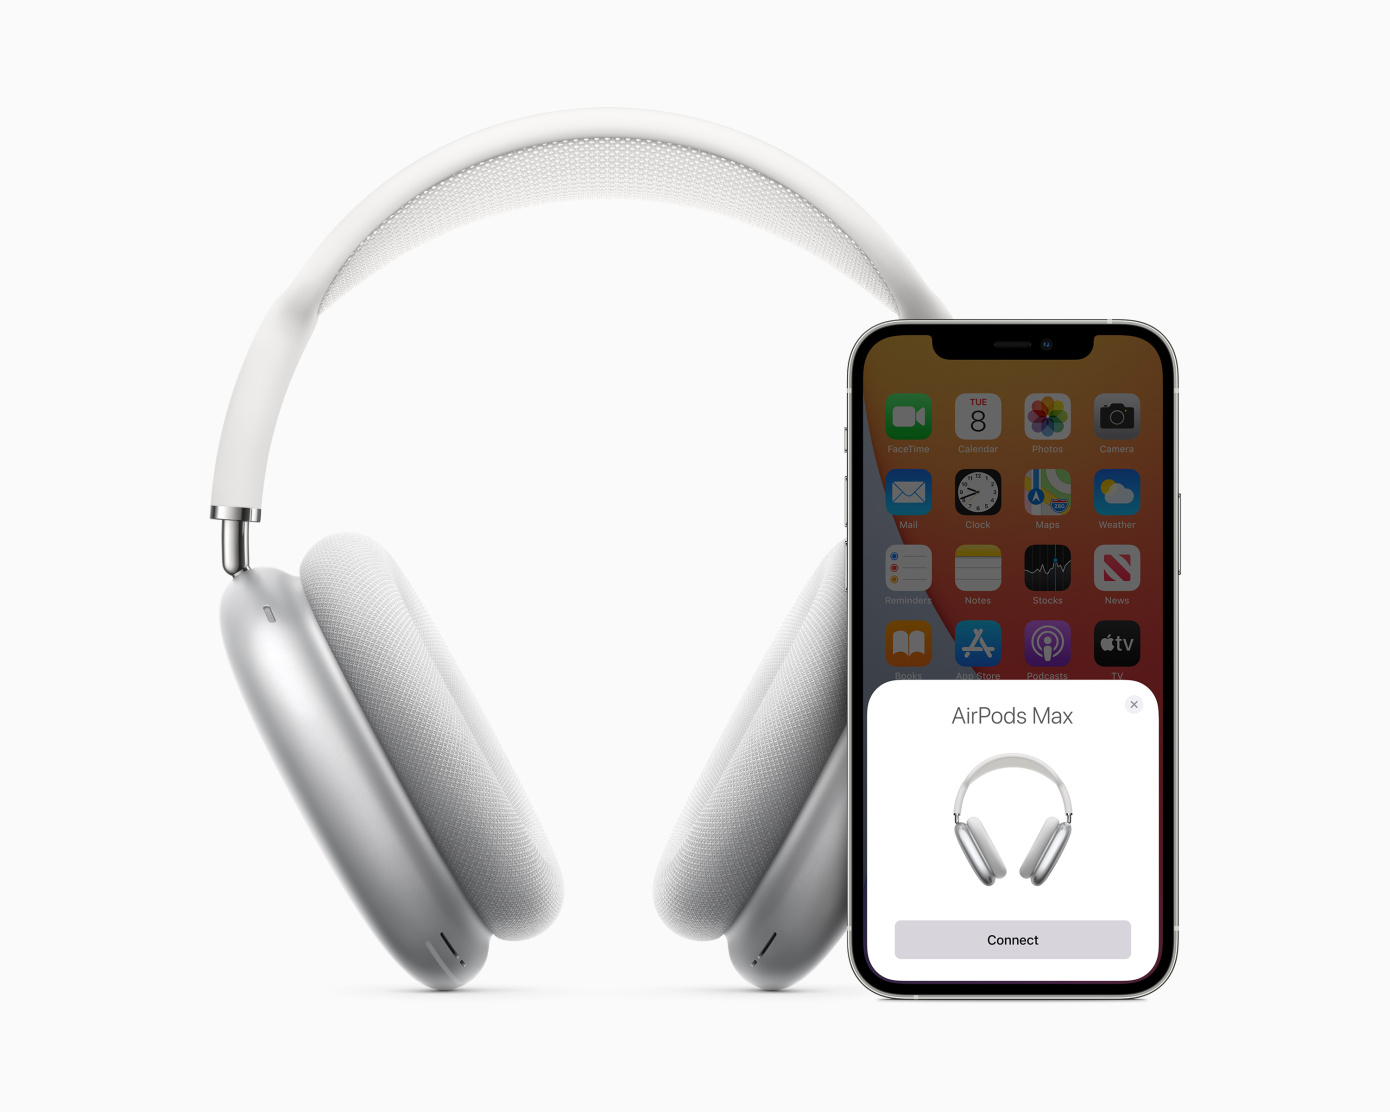 Apple announces $549 over headphones, the AirPods Max